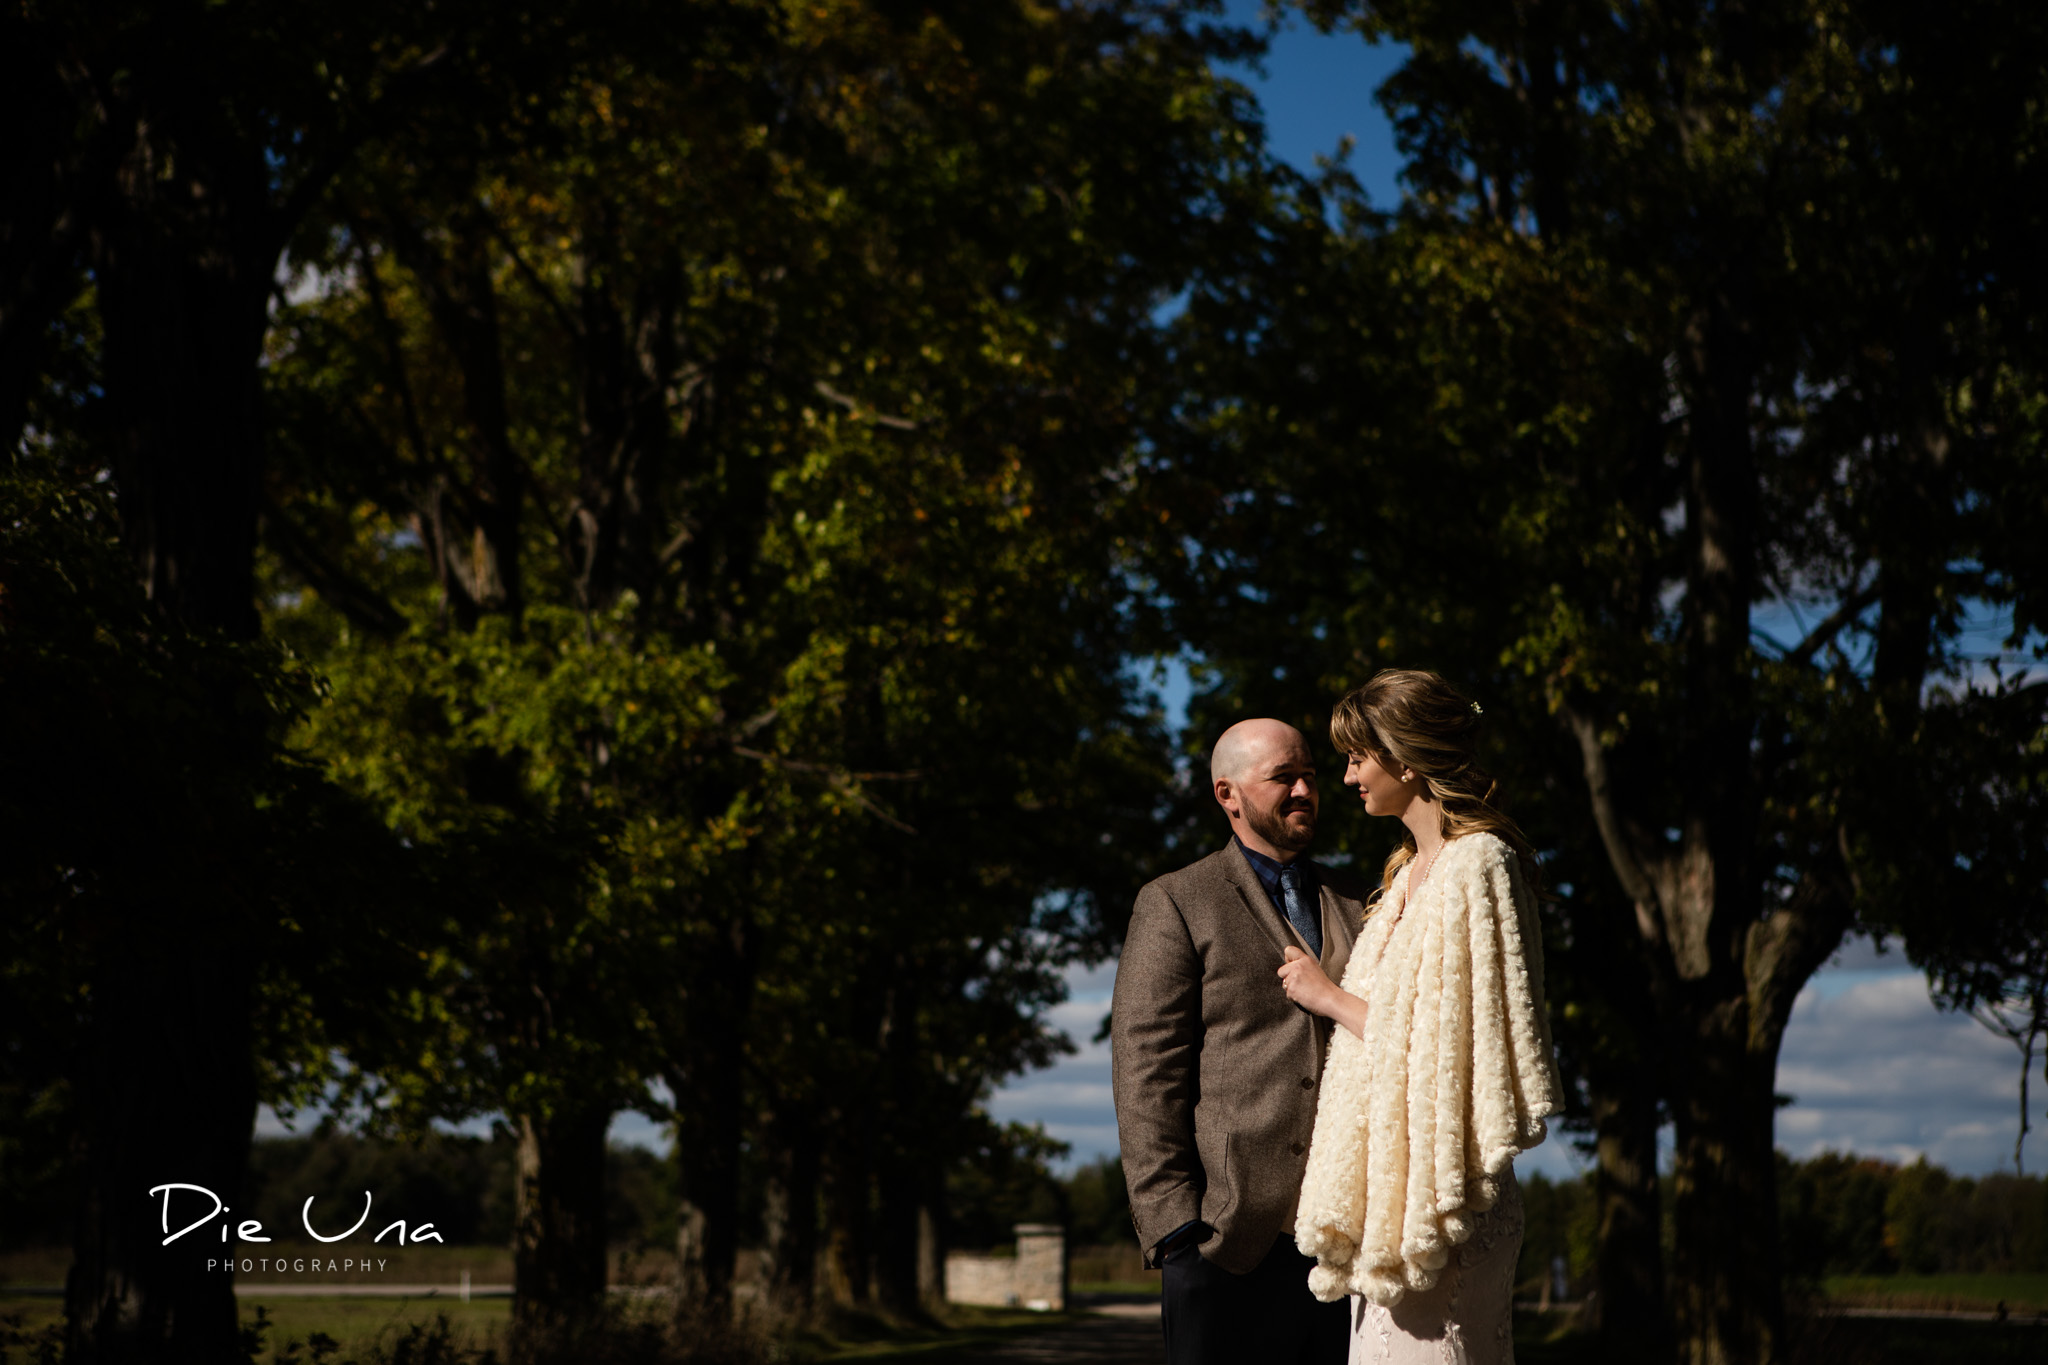 harsh light bride and groom wedding portraits with trees in the background.jpg